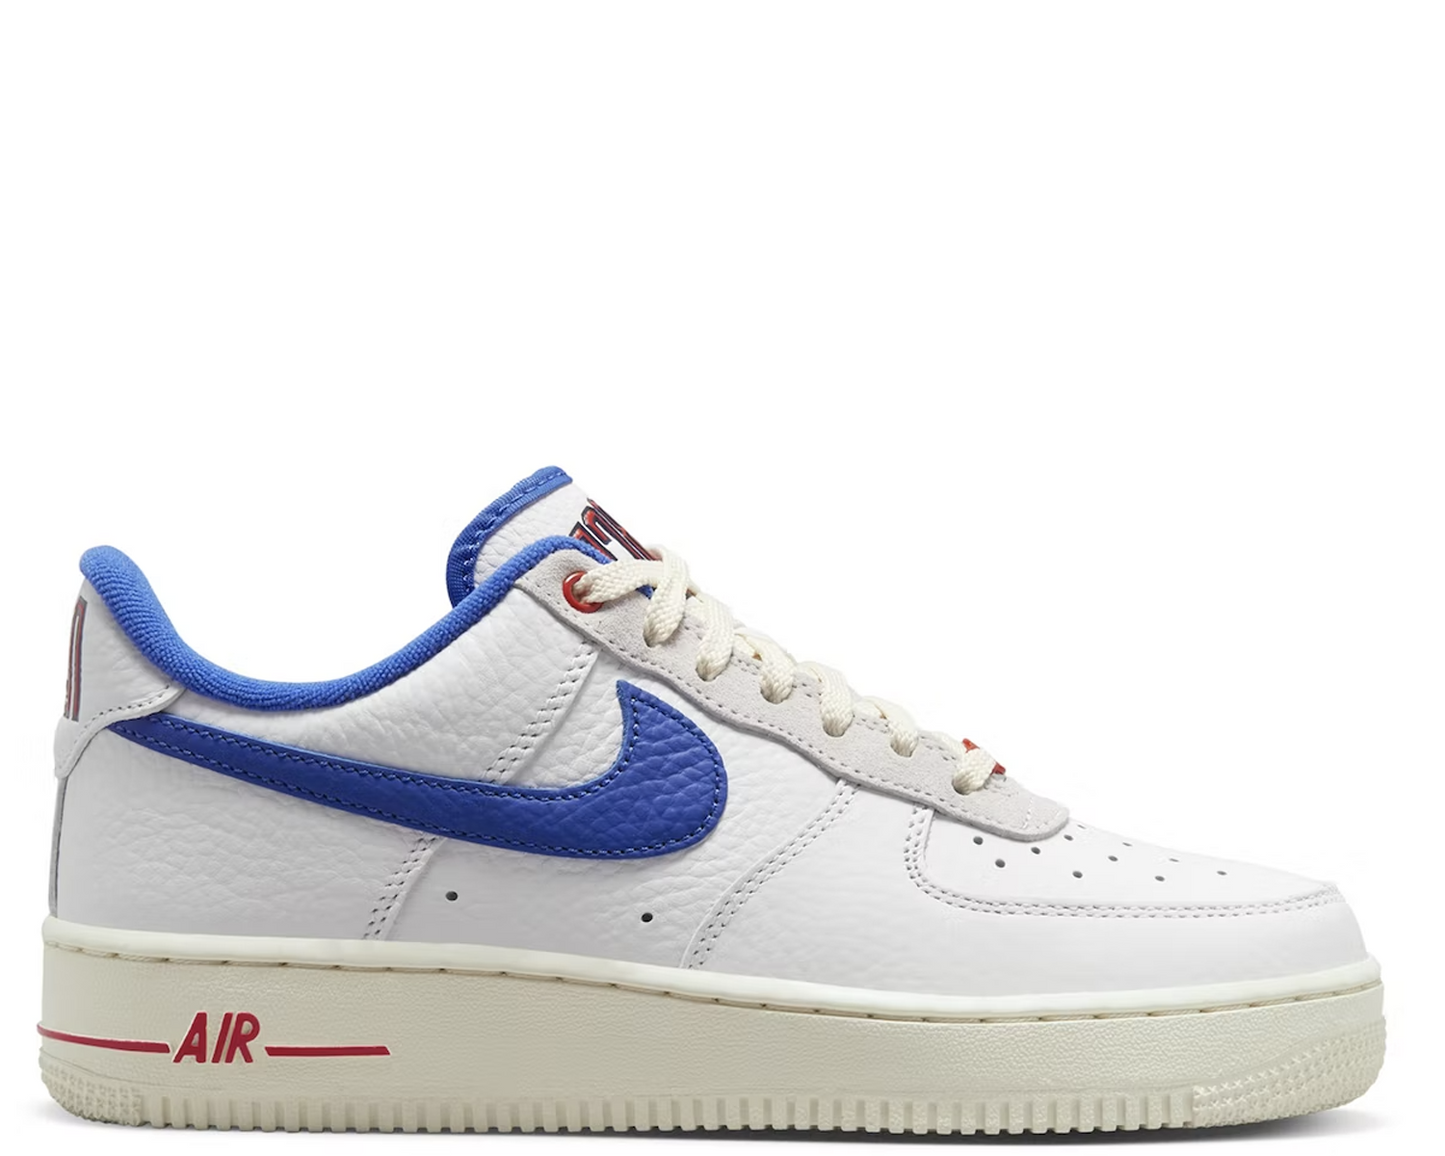 WMNS Air Force 1 Low "Command Force"